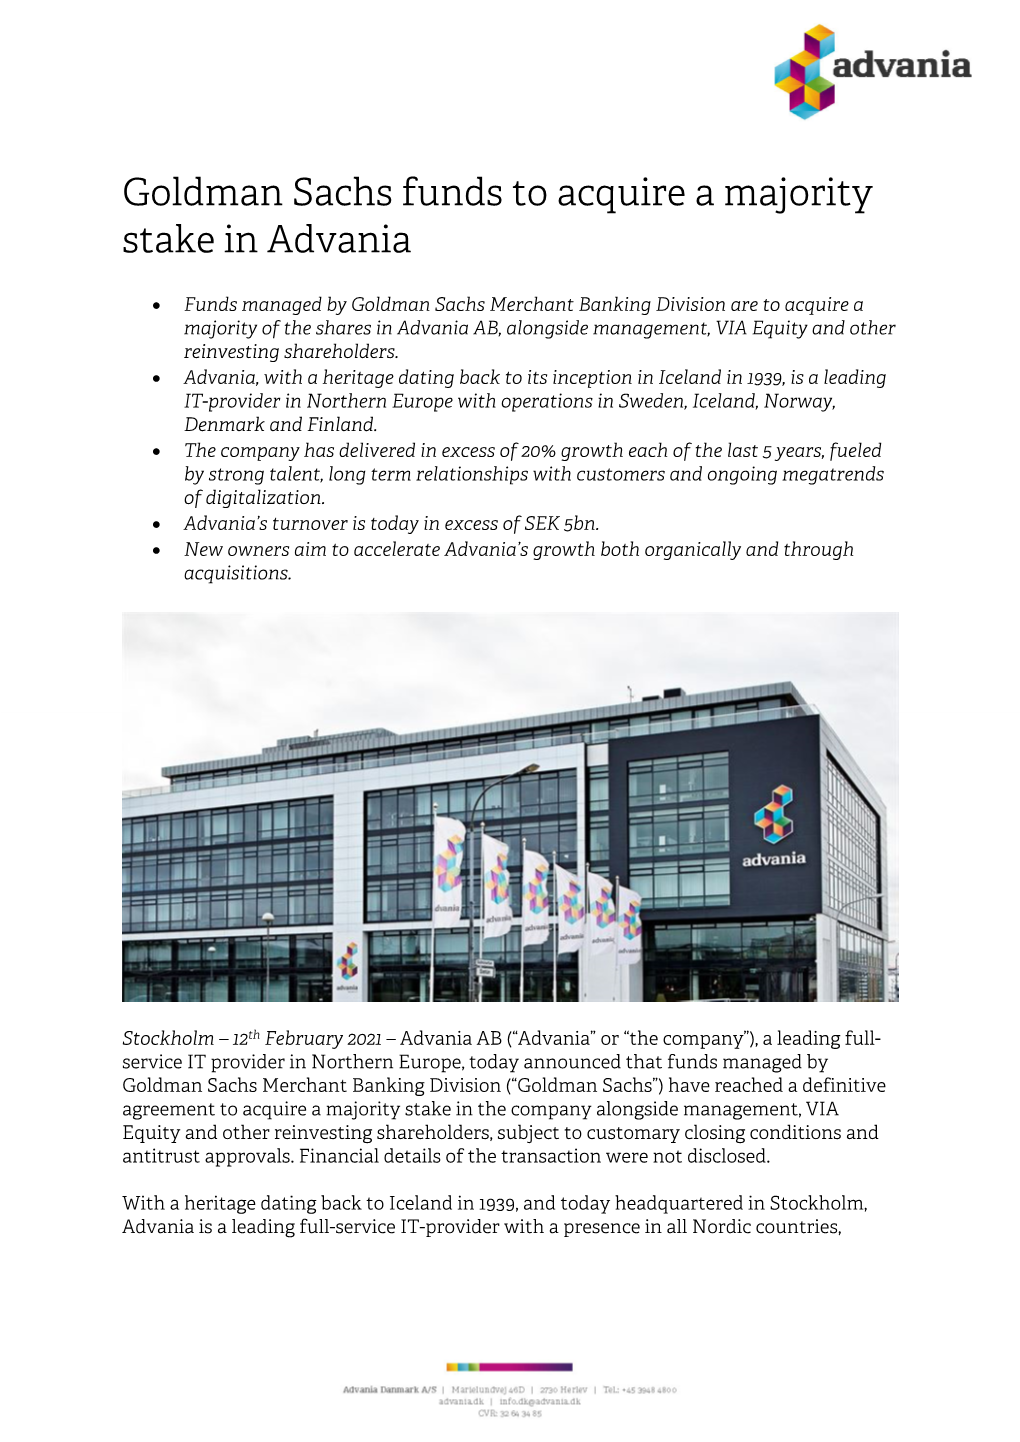 Goldman Sachs Funds to Acquire a Majority Stake in Advania